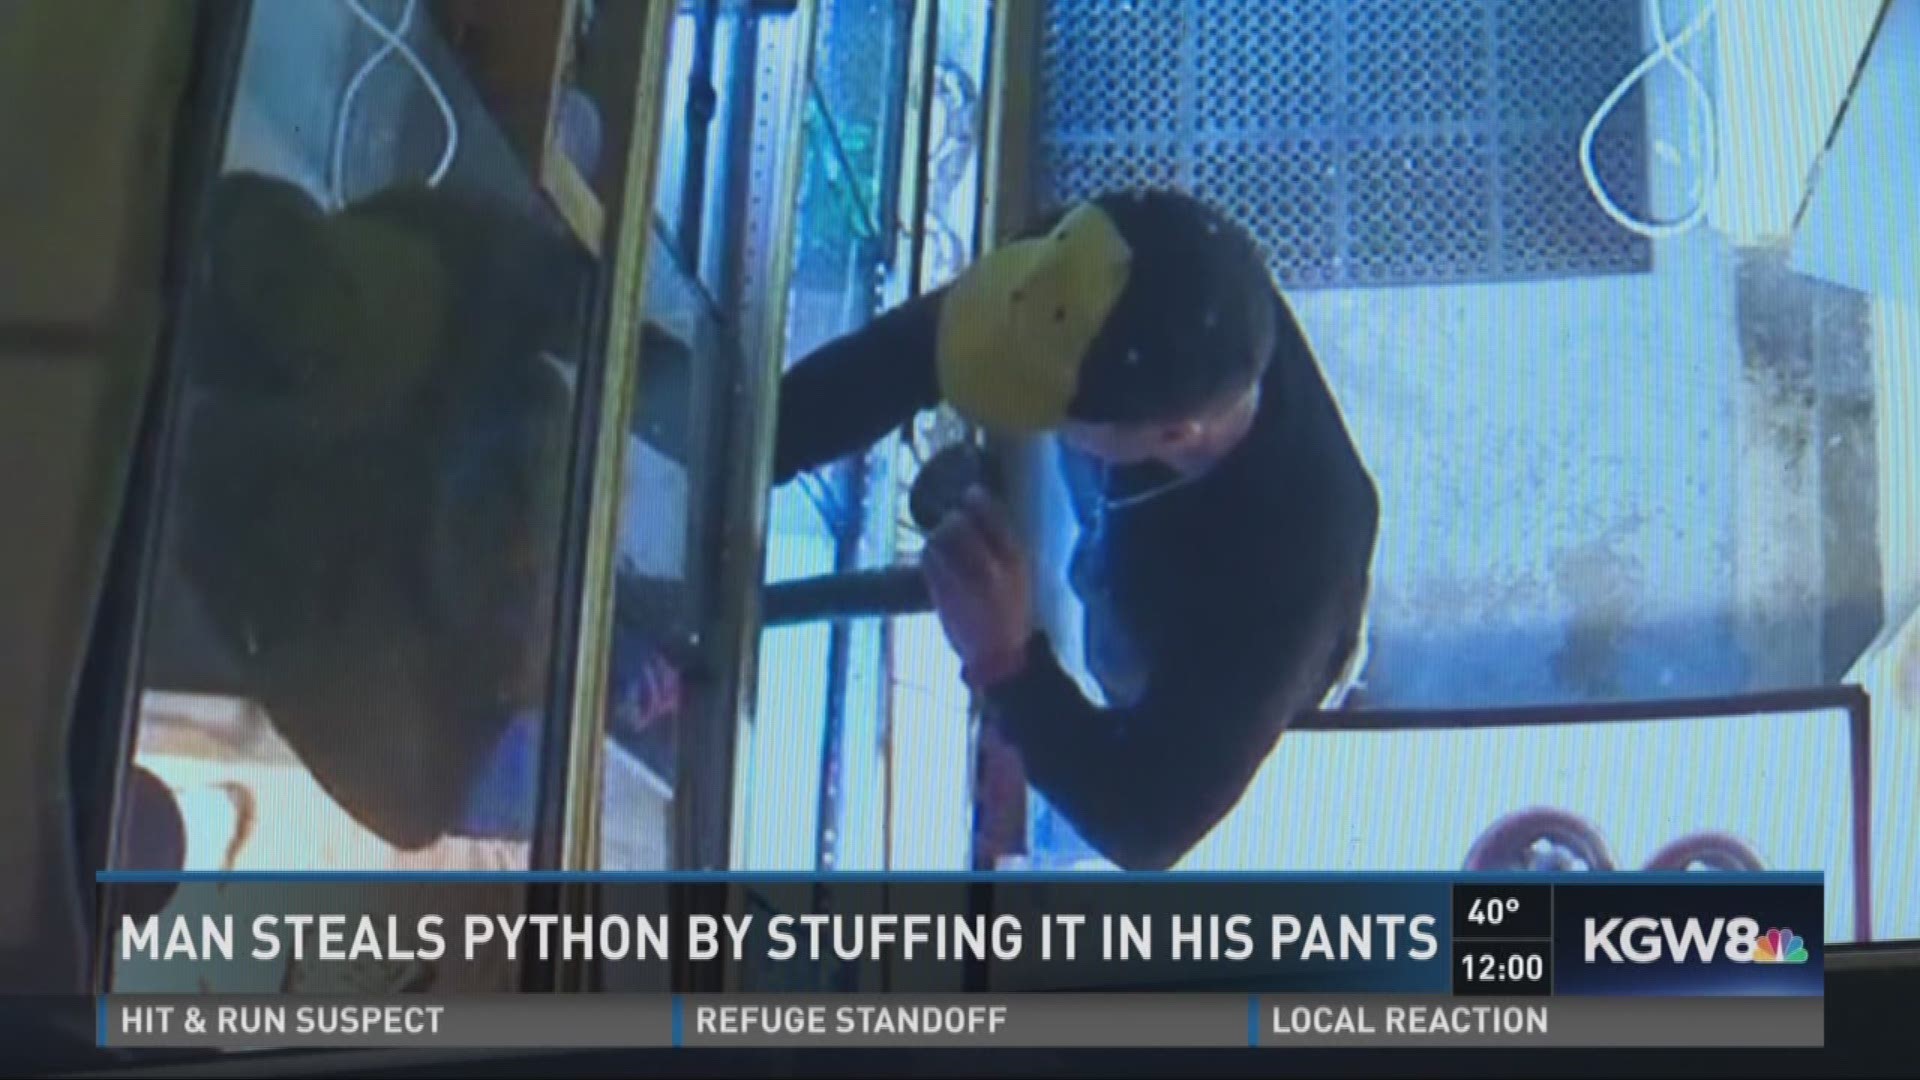 Man steals python by stuffing it in his pants